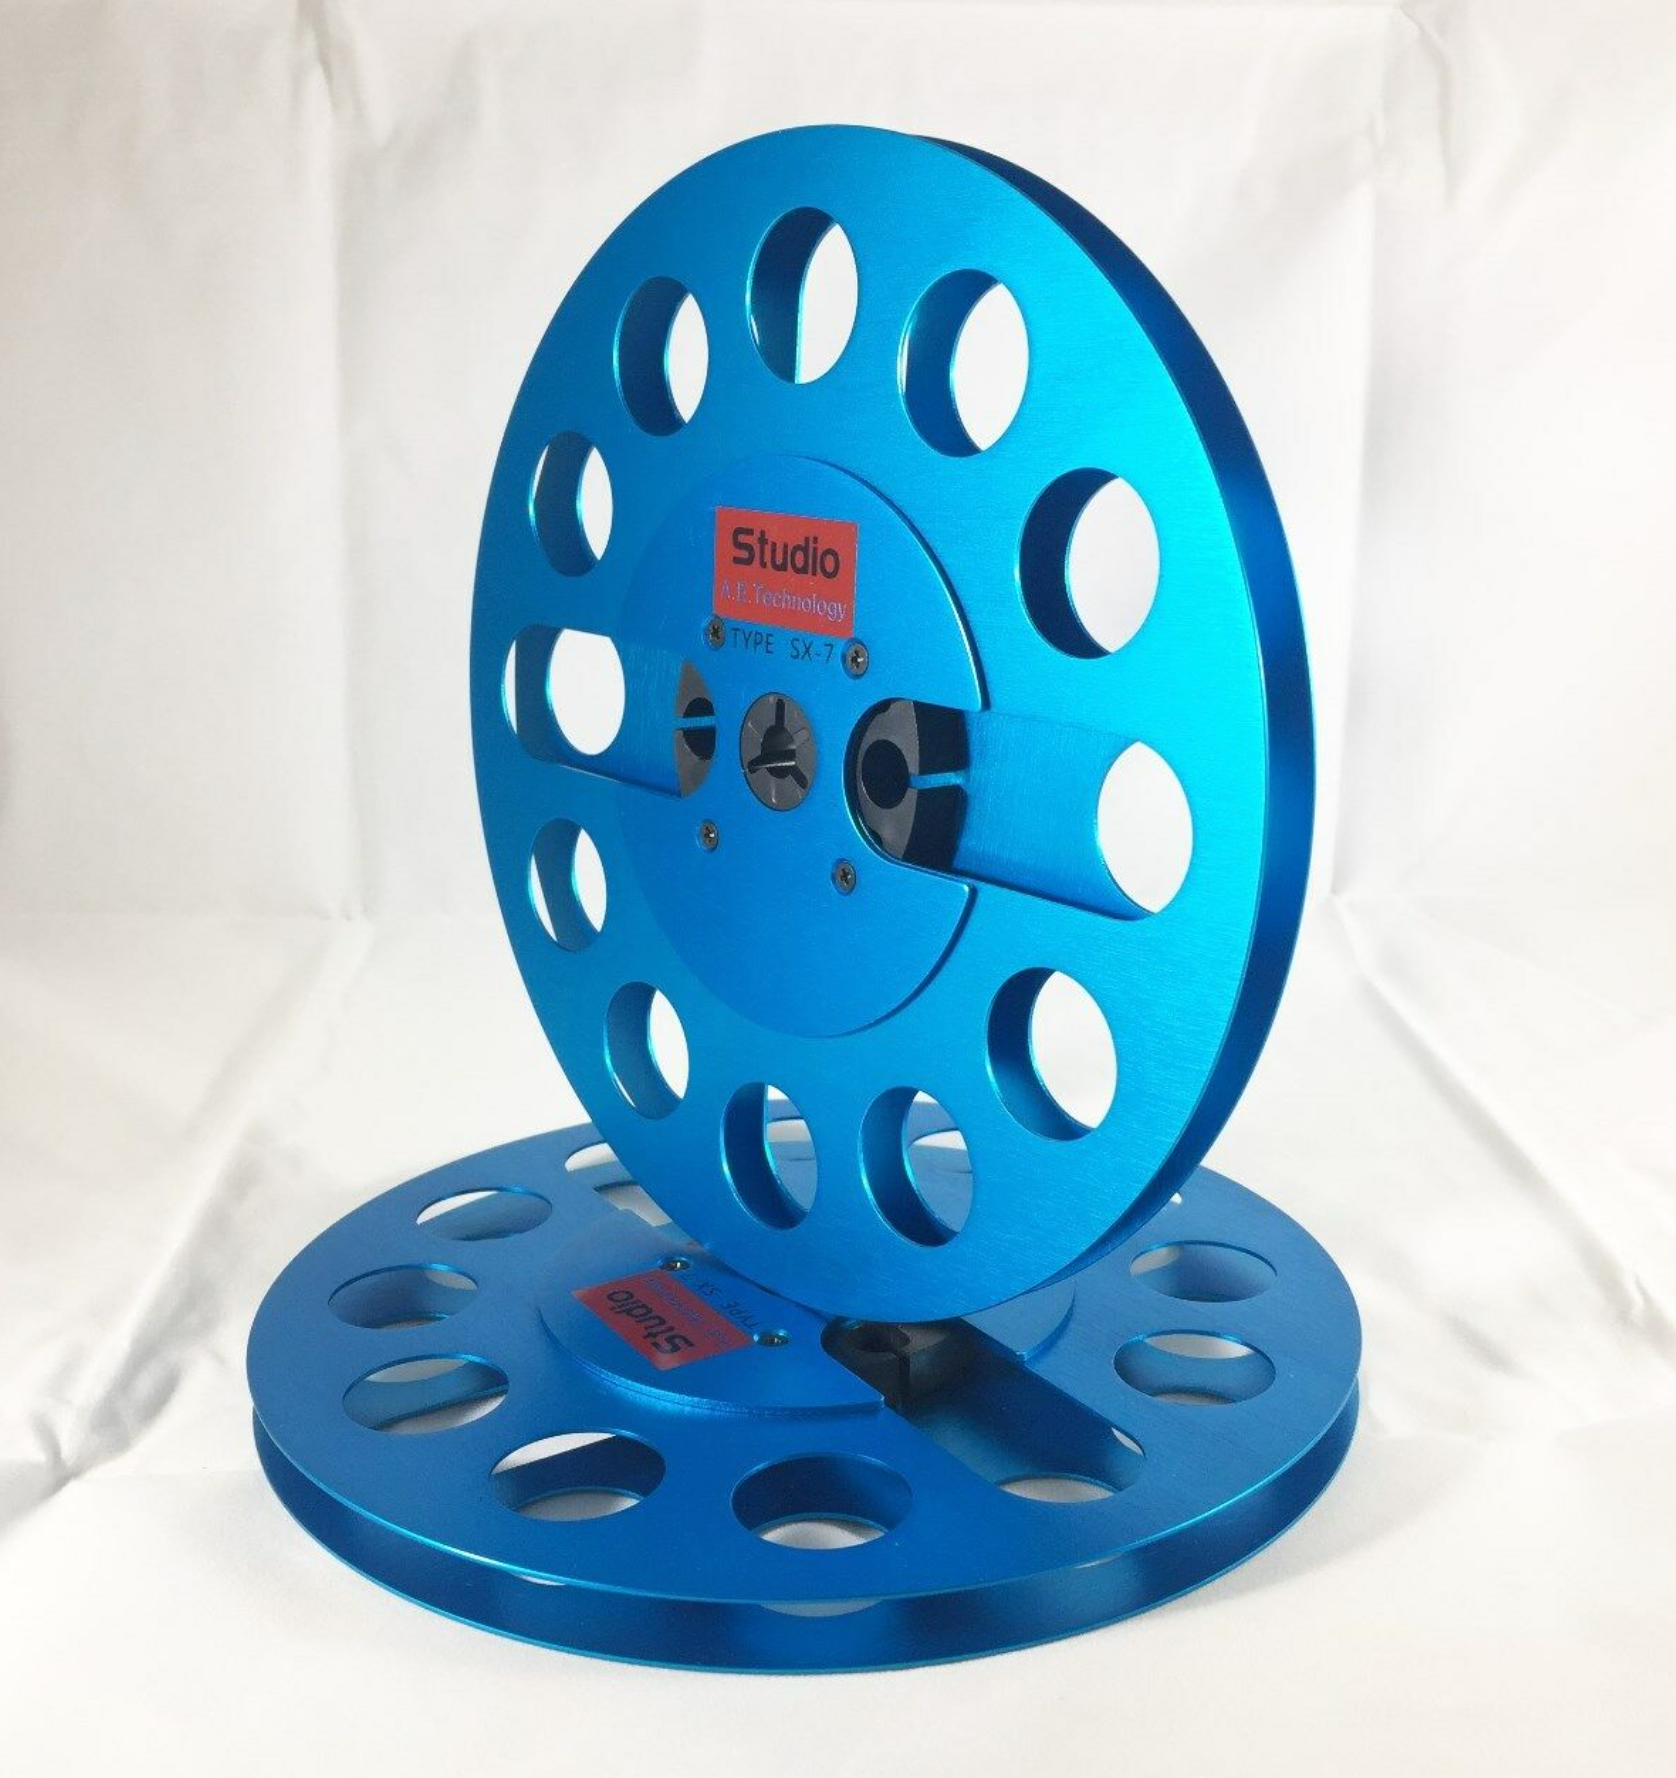 7" Anodized Aluminum metal Reel to Reels - ONE PAIR - Blue